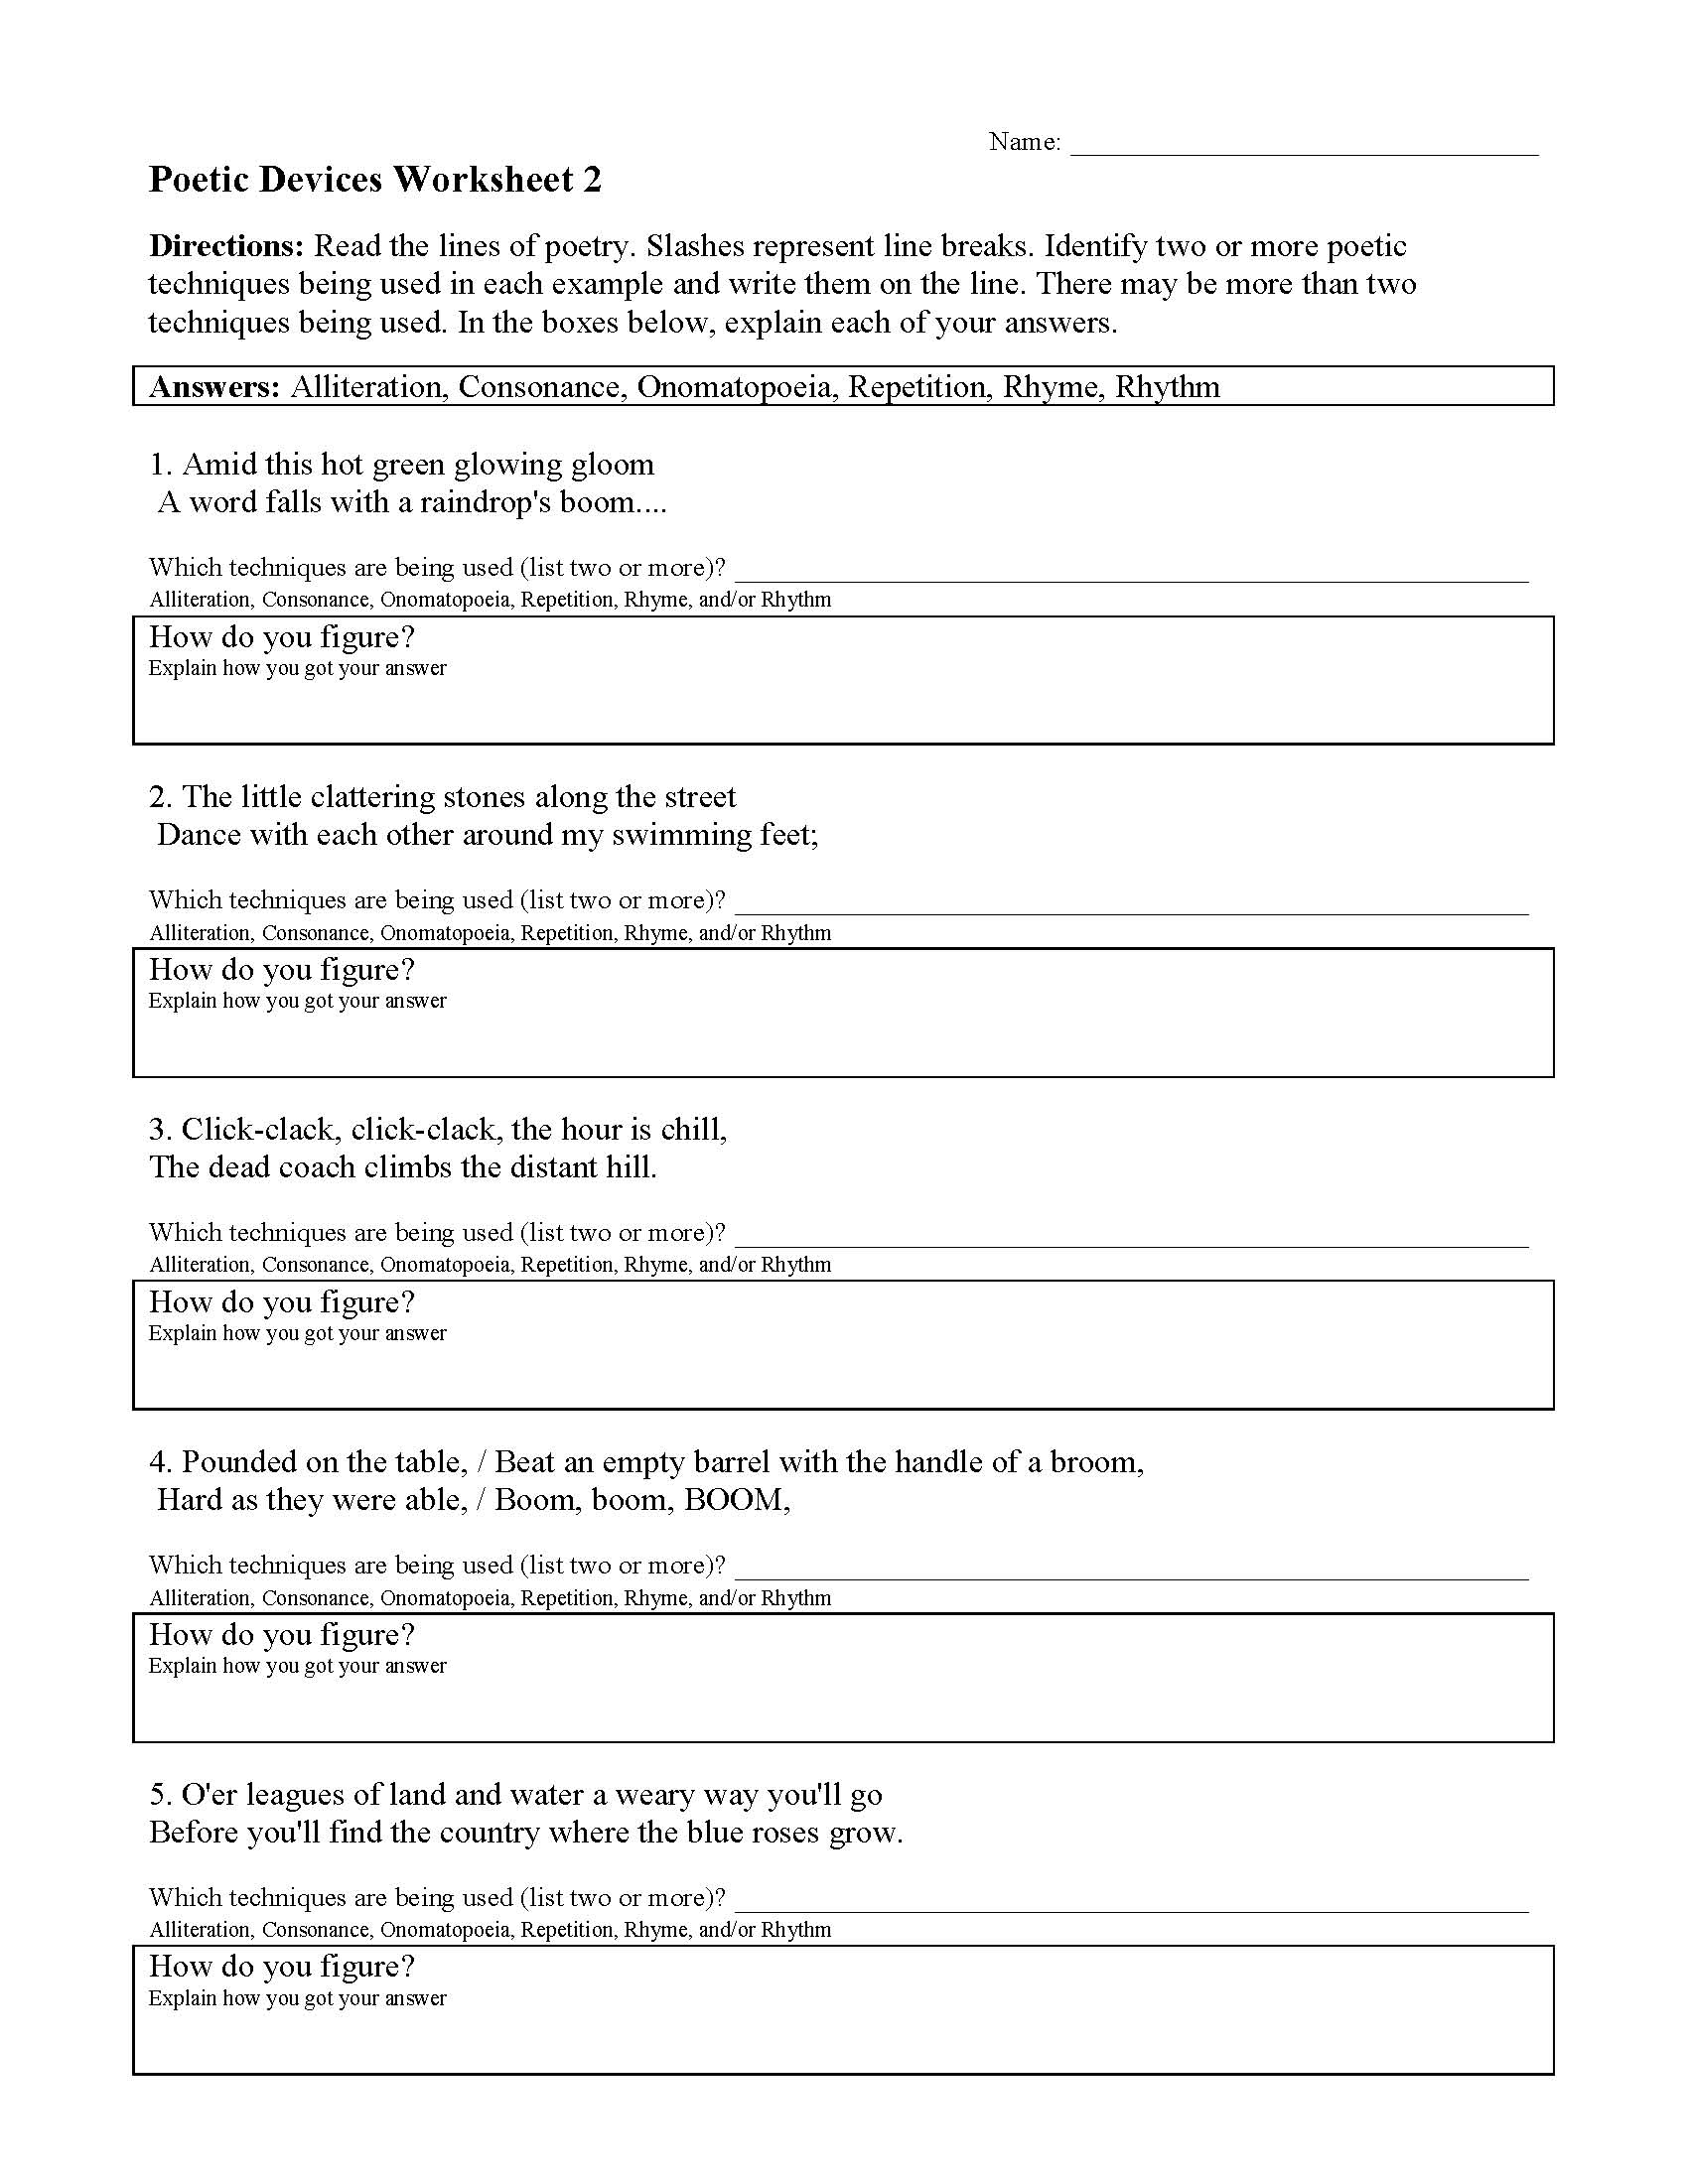 POETIC DEVICES - Definitions & Examples  Ereading Worksheets Intended For Poetic Devices Worksheet 1